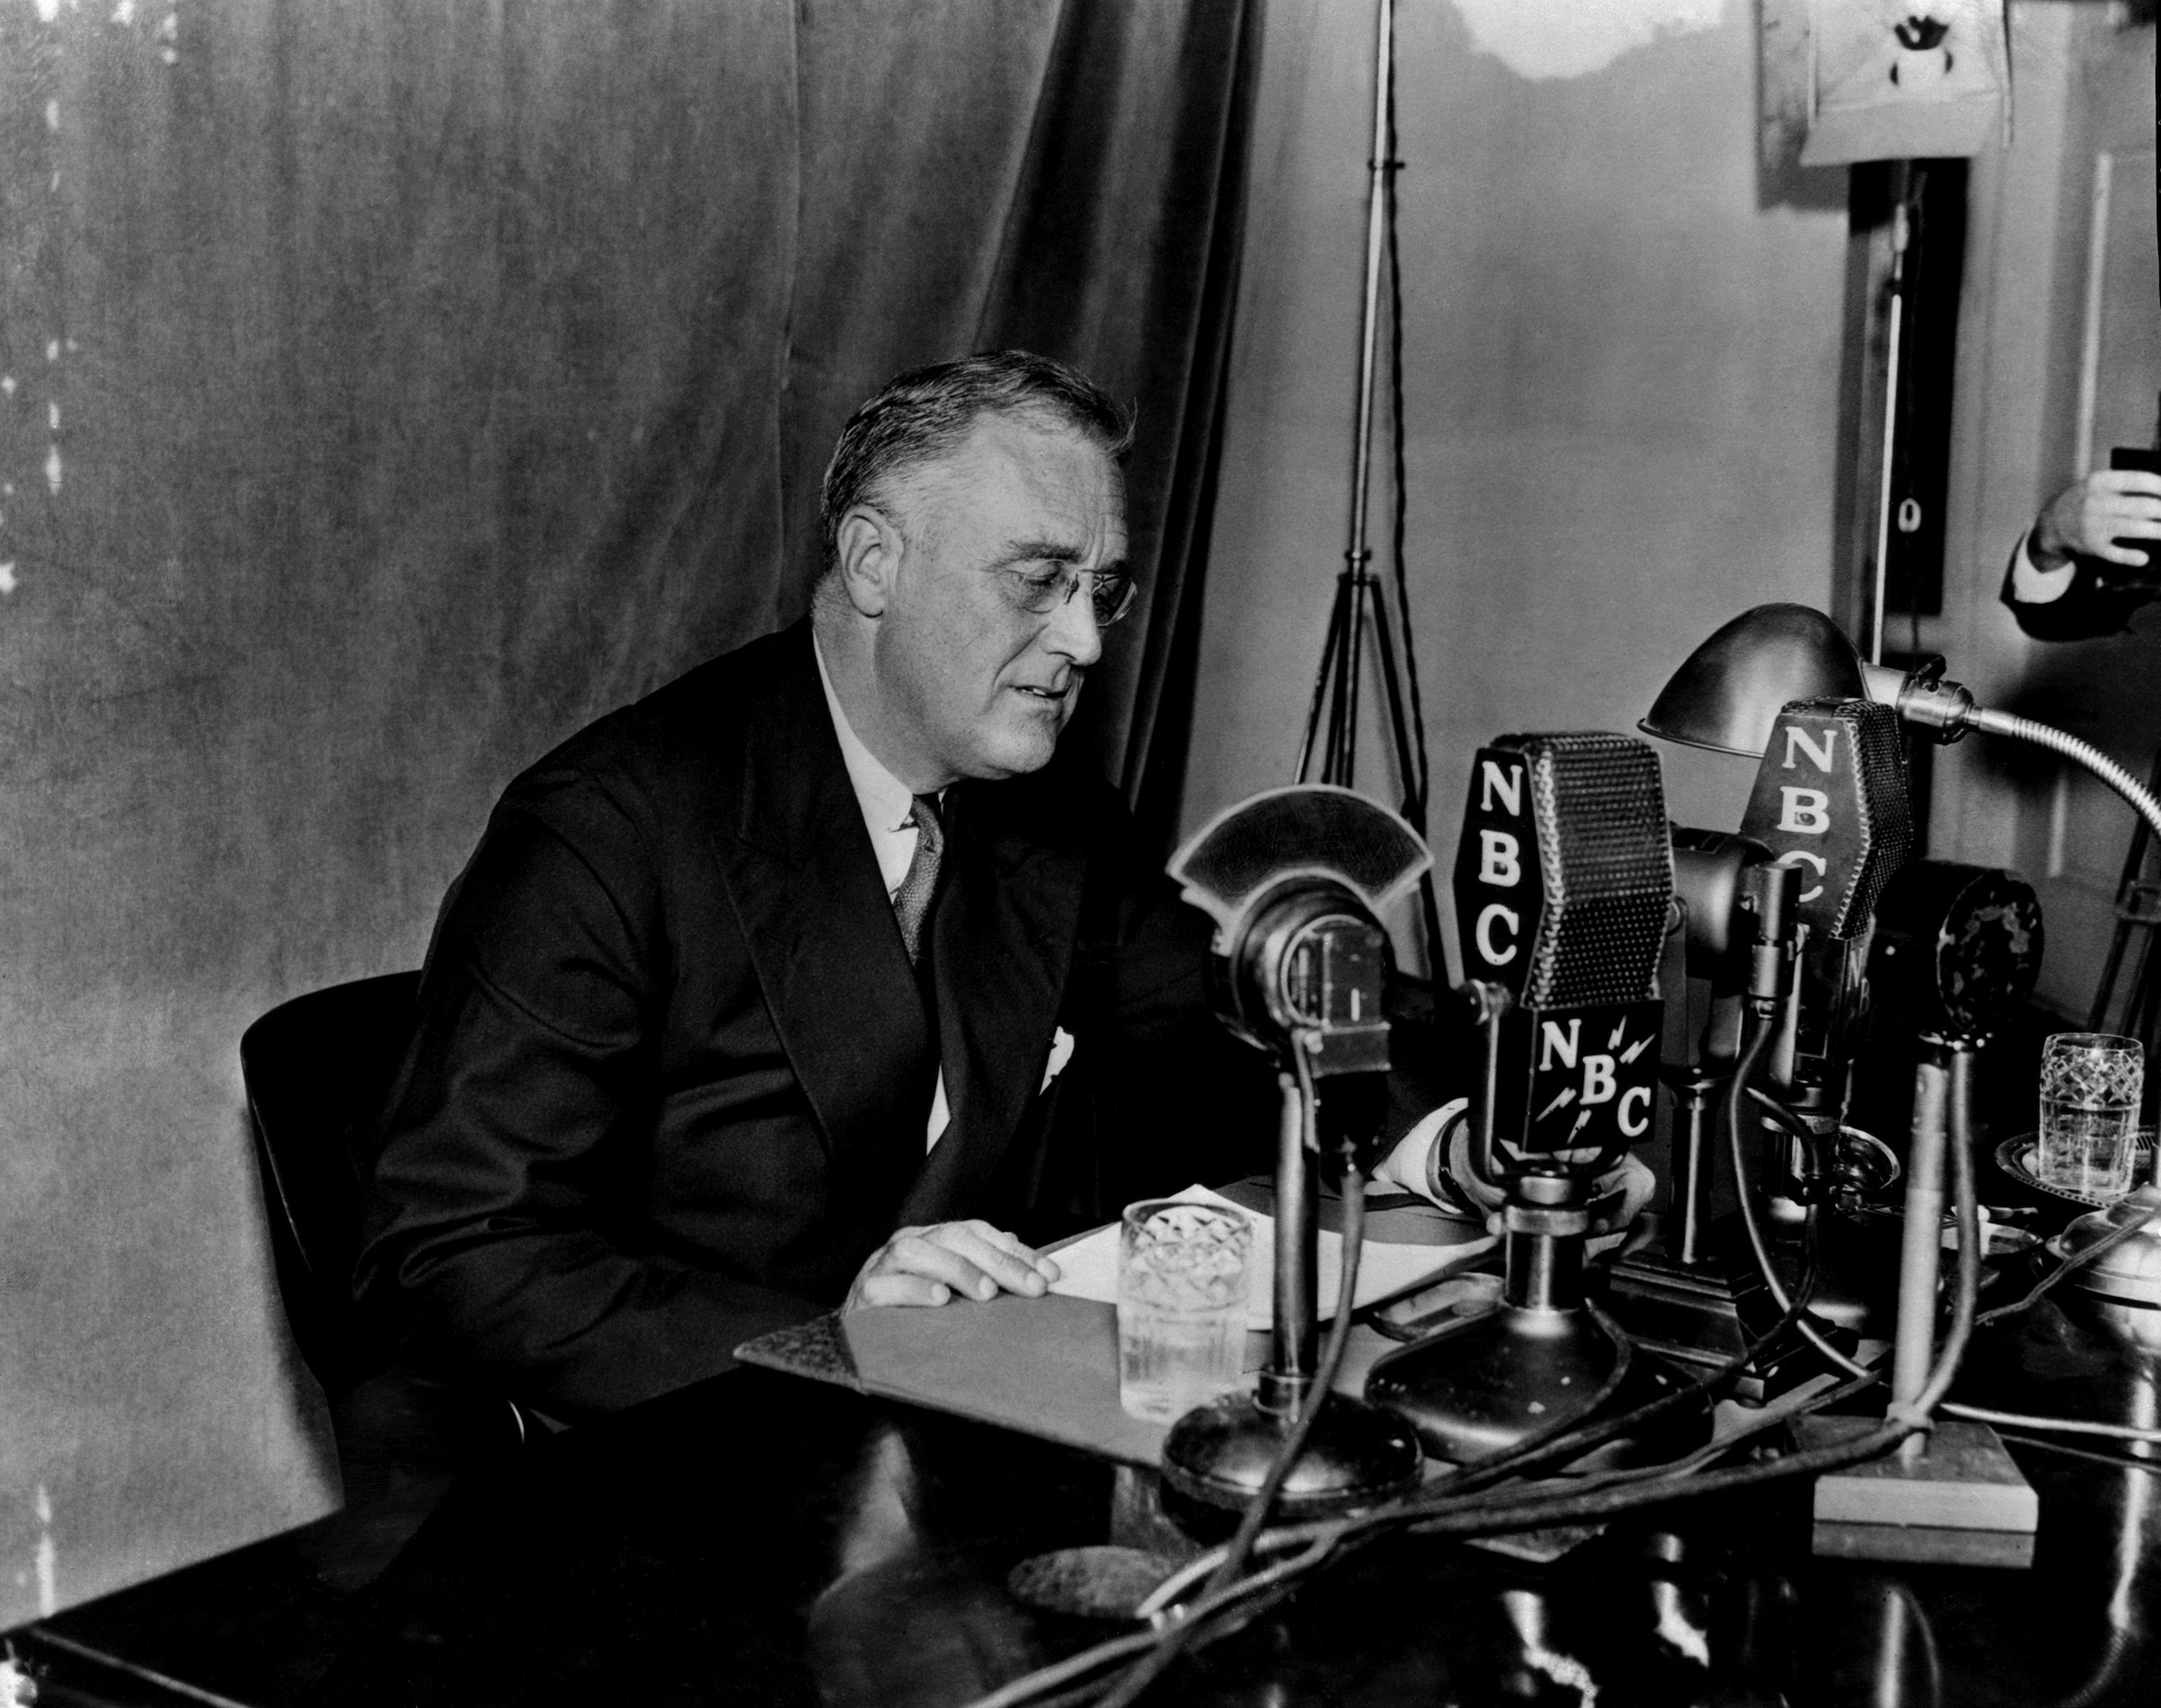 President Franklin D. Roosevelt during one of his "fireside chats" broadcasted on NBC Radio (NBCUniversal via Getty Images)